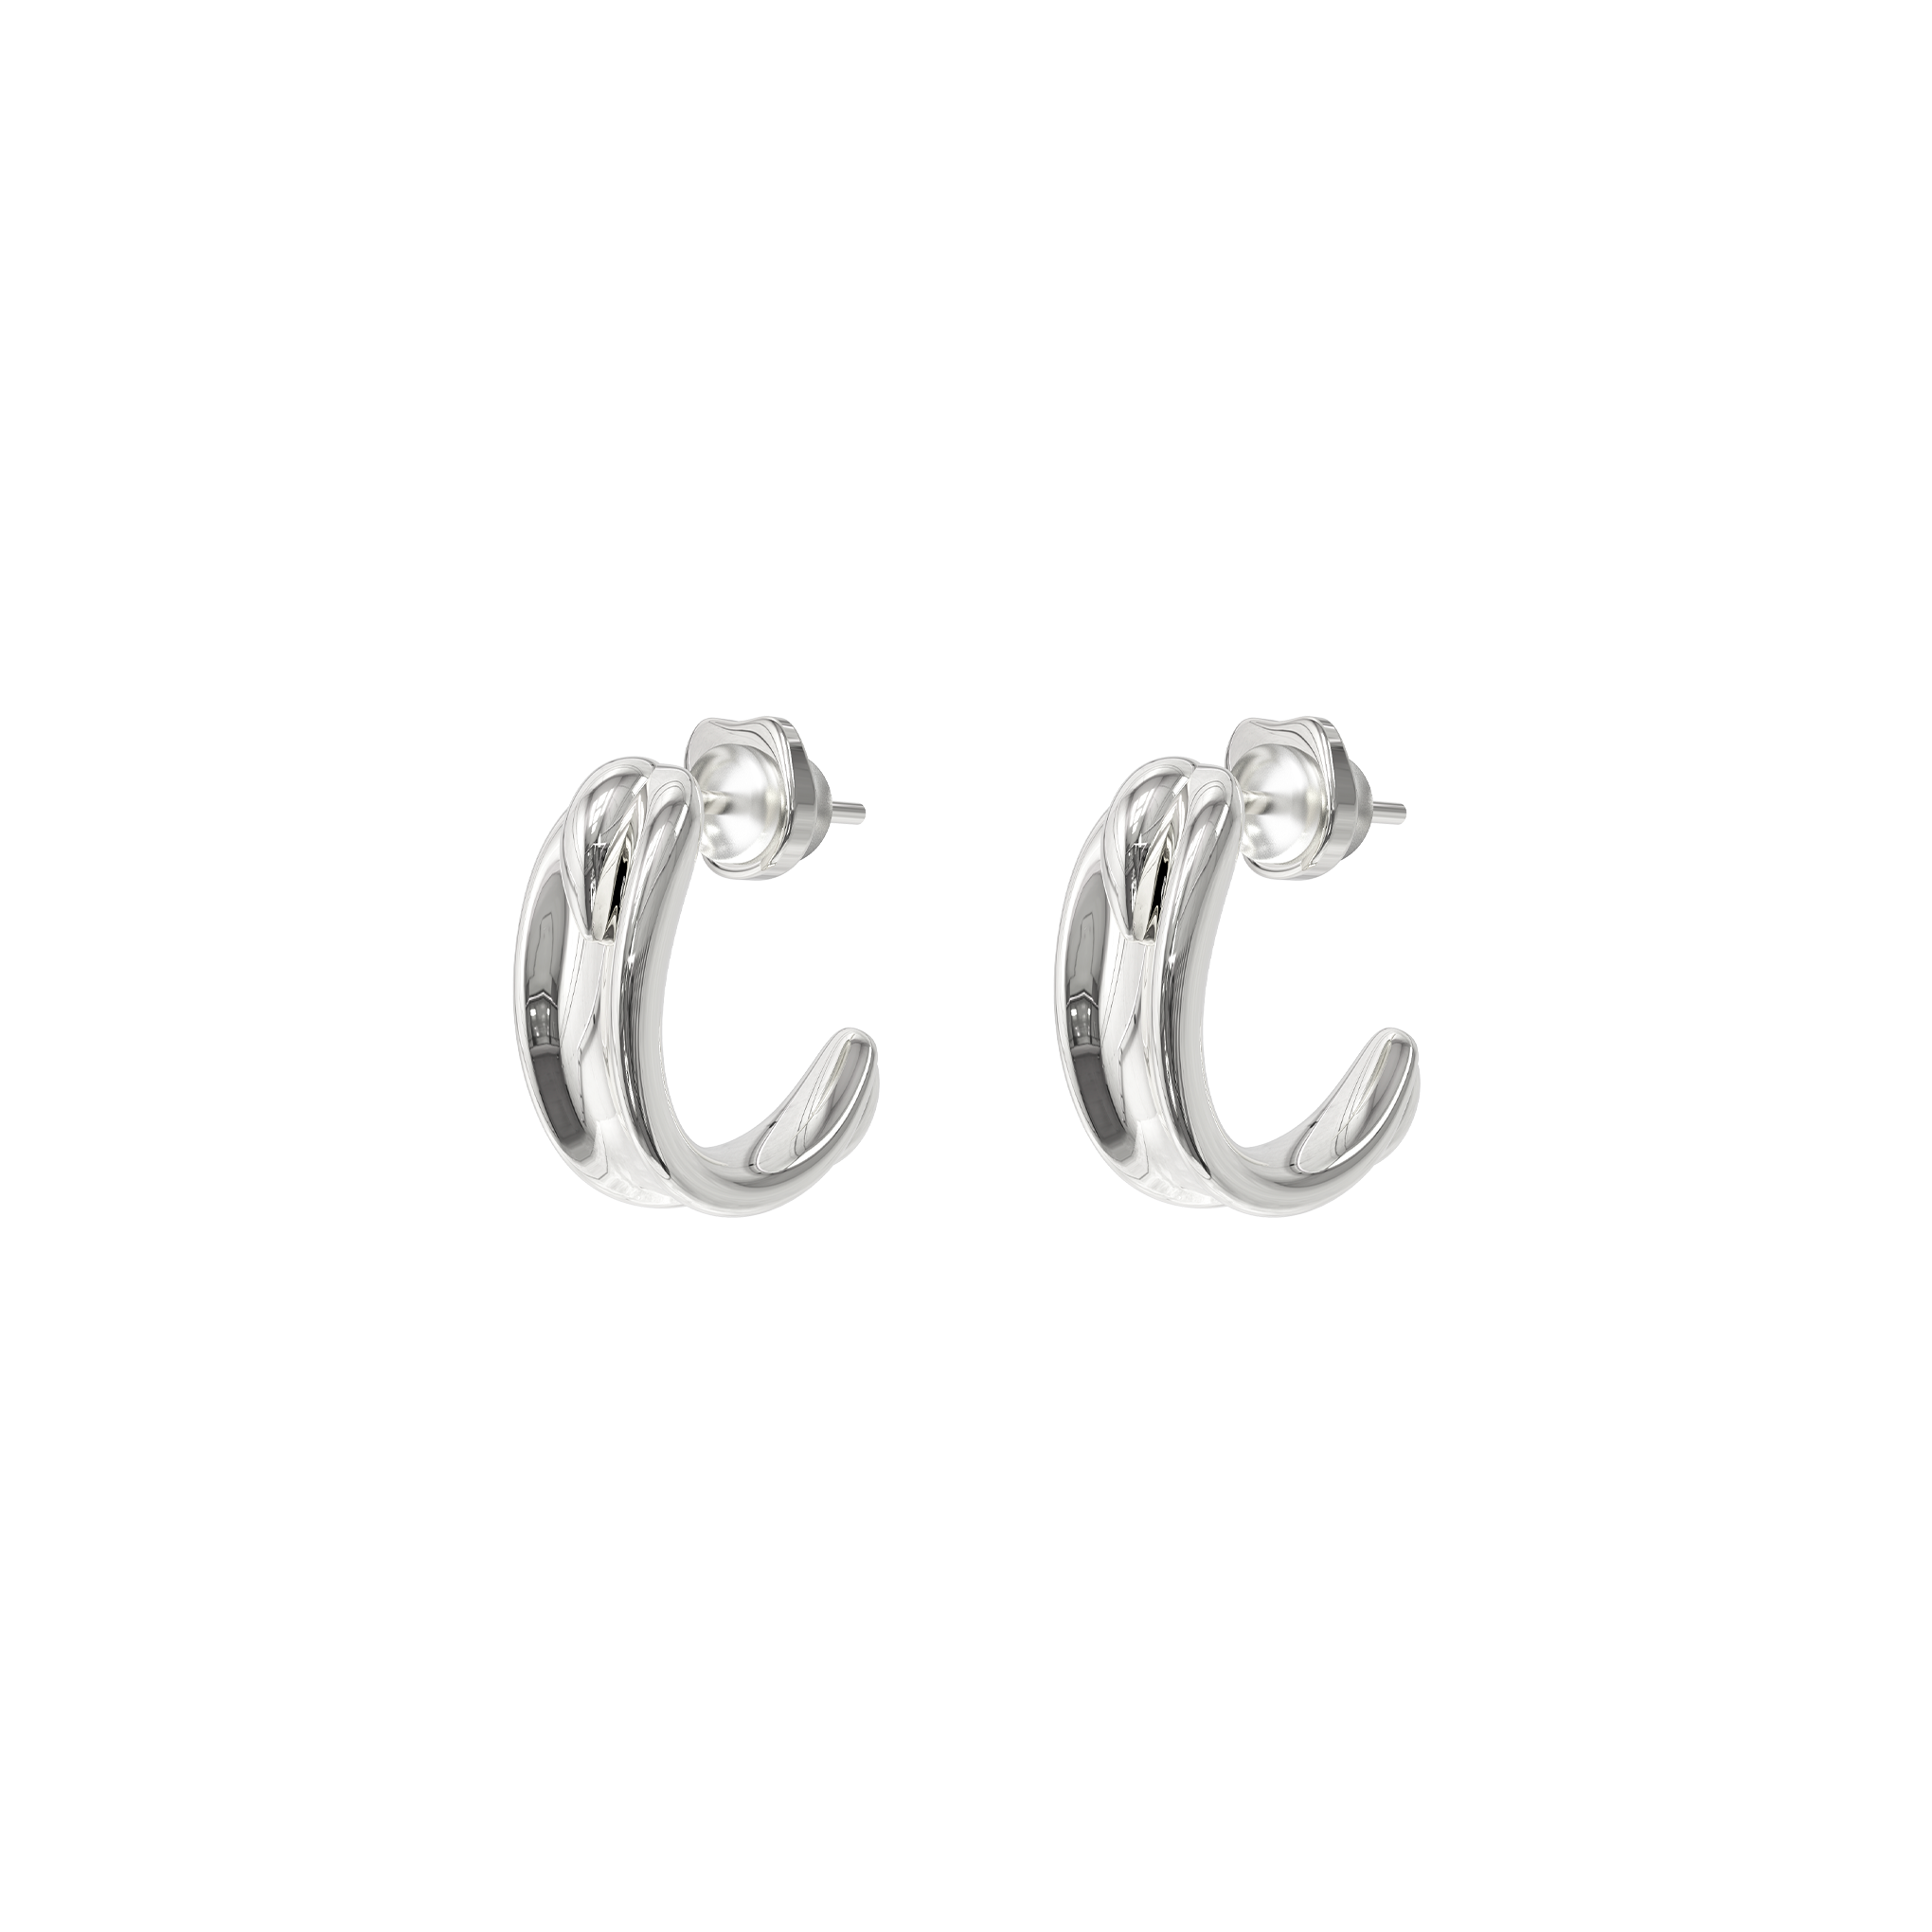 CONCAVE BASIC EARRINGS